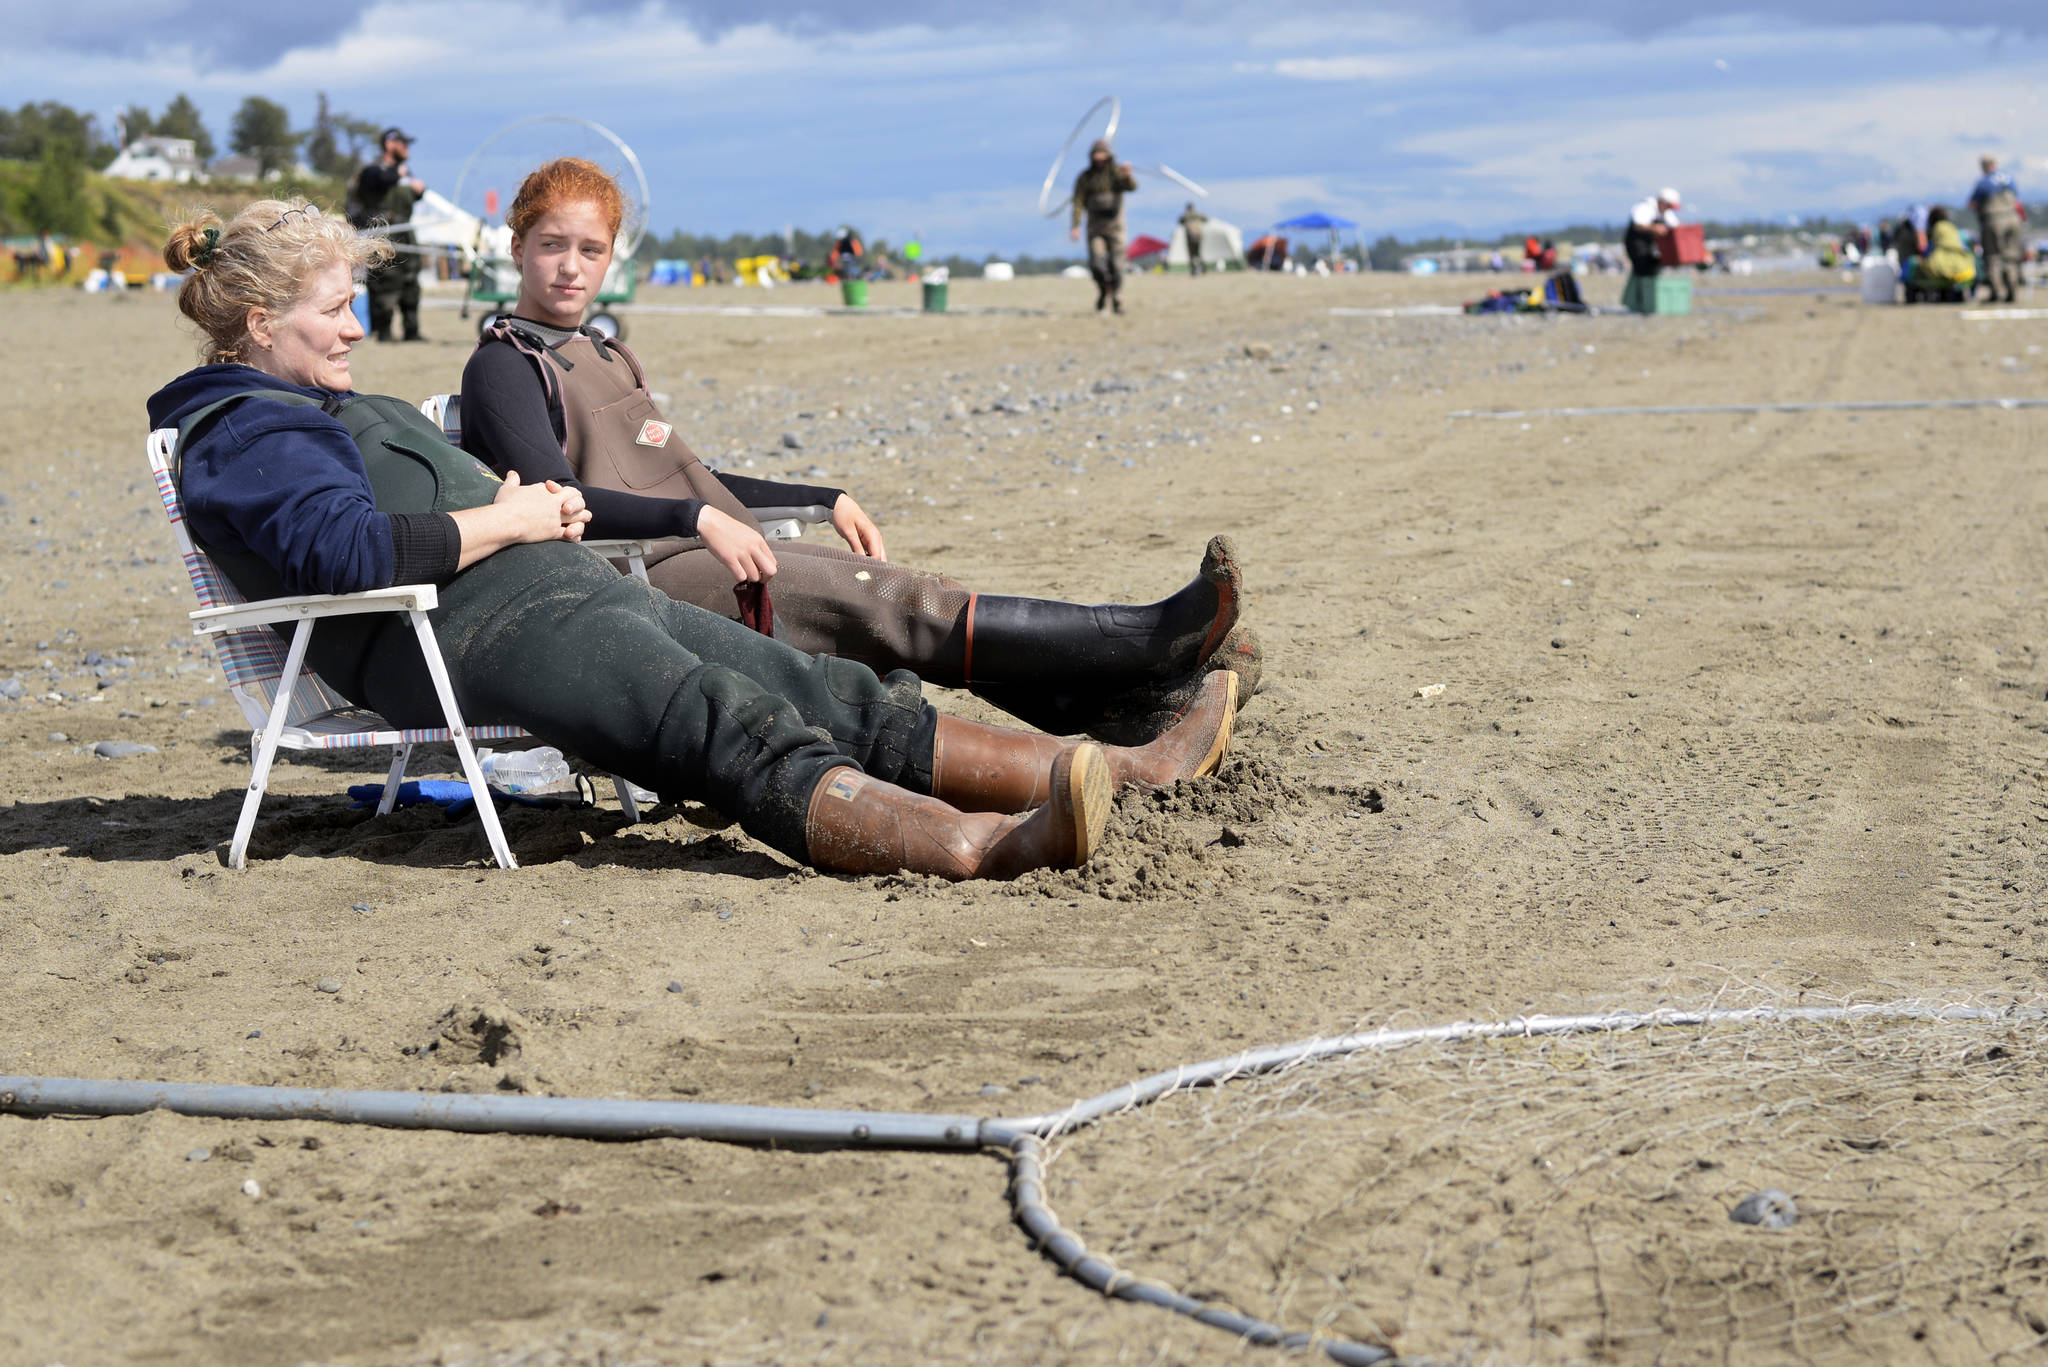 Tiffany Musgrave (left) and daughter McCady Musgrave take a break from dipnetting on Kenai’s north beach on Thursday, July 26, 2018 in Kenai, Alaska. Tiffany Musgrave said the family had caught two salmon that day and four the previous day, making this year’s dipnet one of the worst she remembered — one year, she recalled, she and her husband had caught 64 fish in four hours on Kenai’s south beach. (Ben Boettger/Peninsula Clarion)